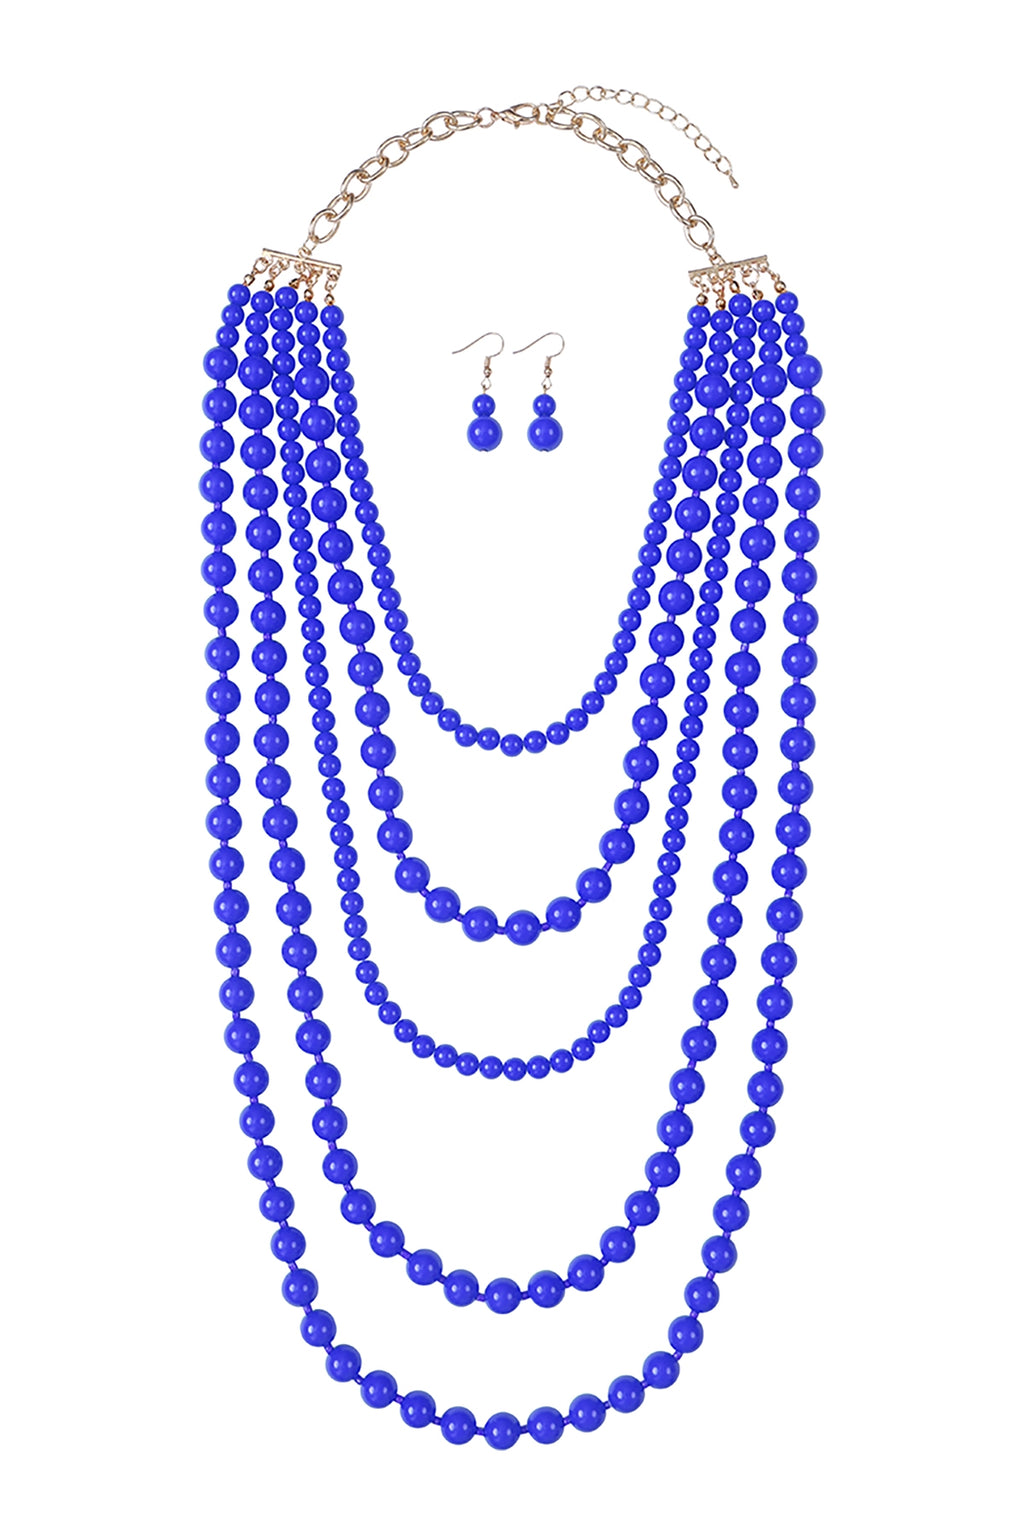 Multi Layered Beads Necklace and Earrings Set Sapphire - Pack of 6